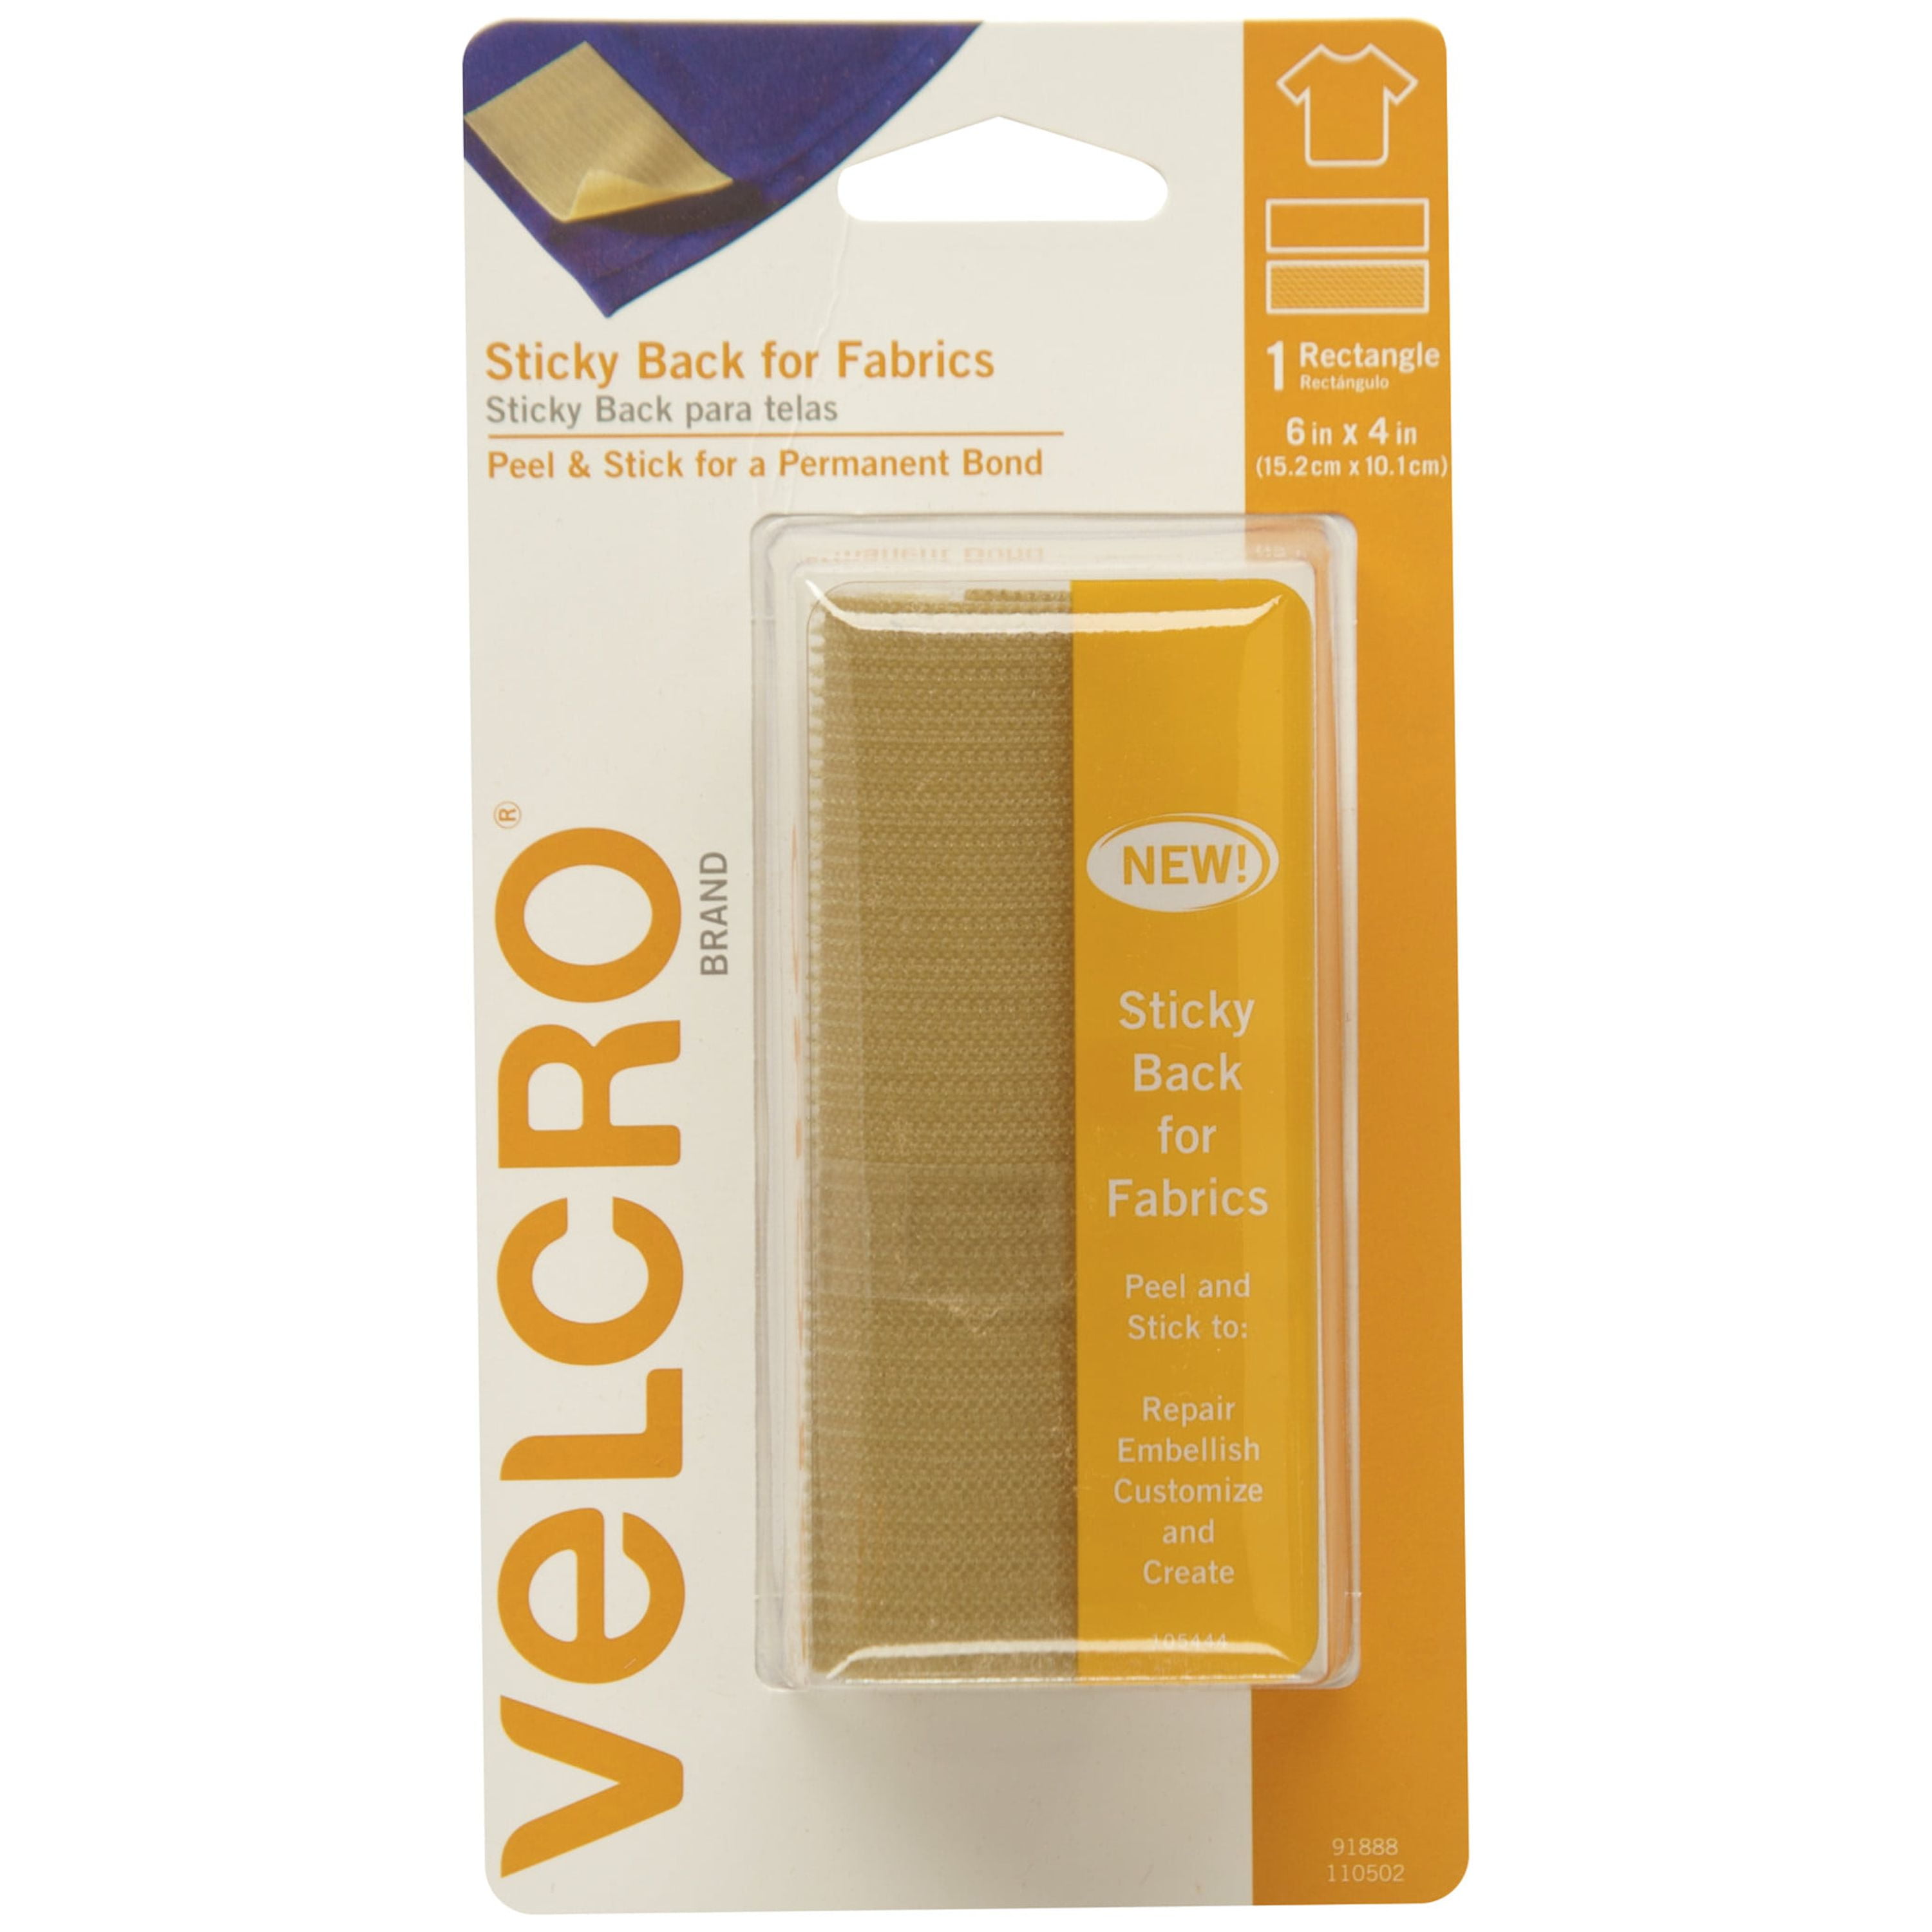 Velcro Brand Sticky Back for Fabric Tape .75X24 Beige